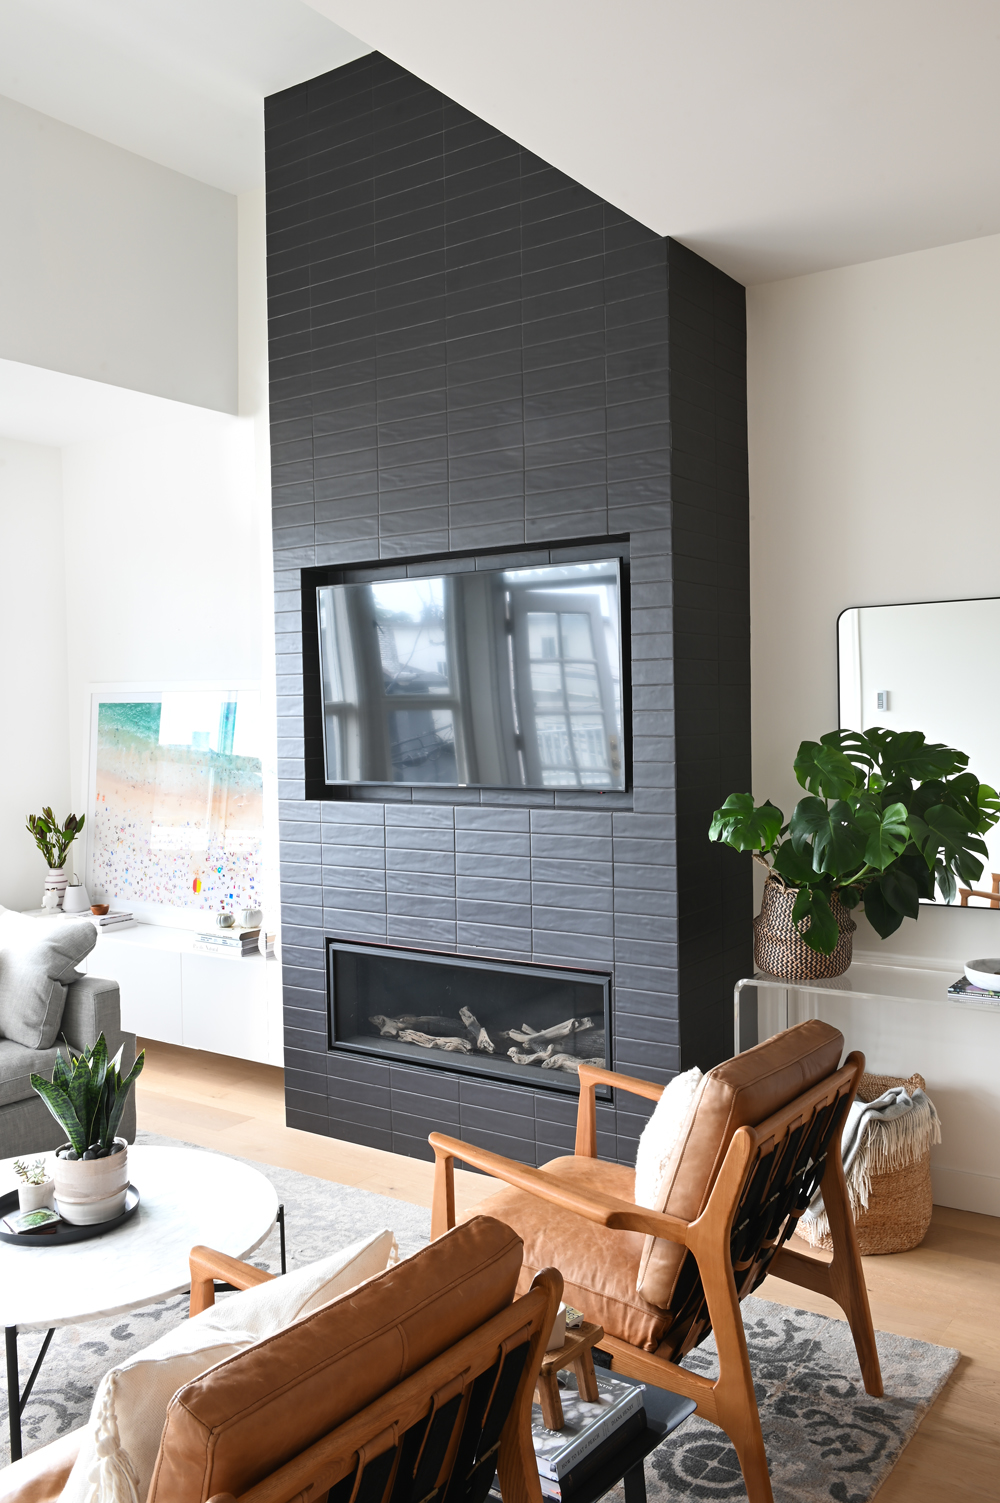 Black brick gas fireplace with TV inset and two tan and wood leather chairs in foreground